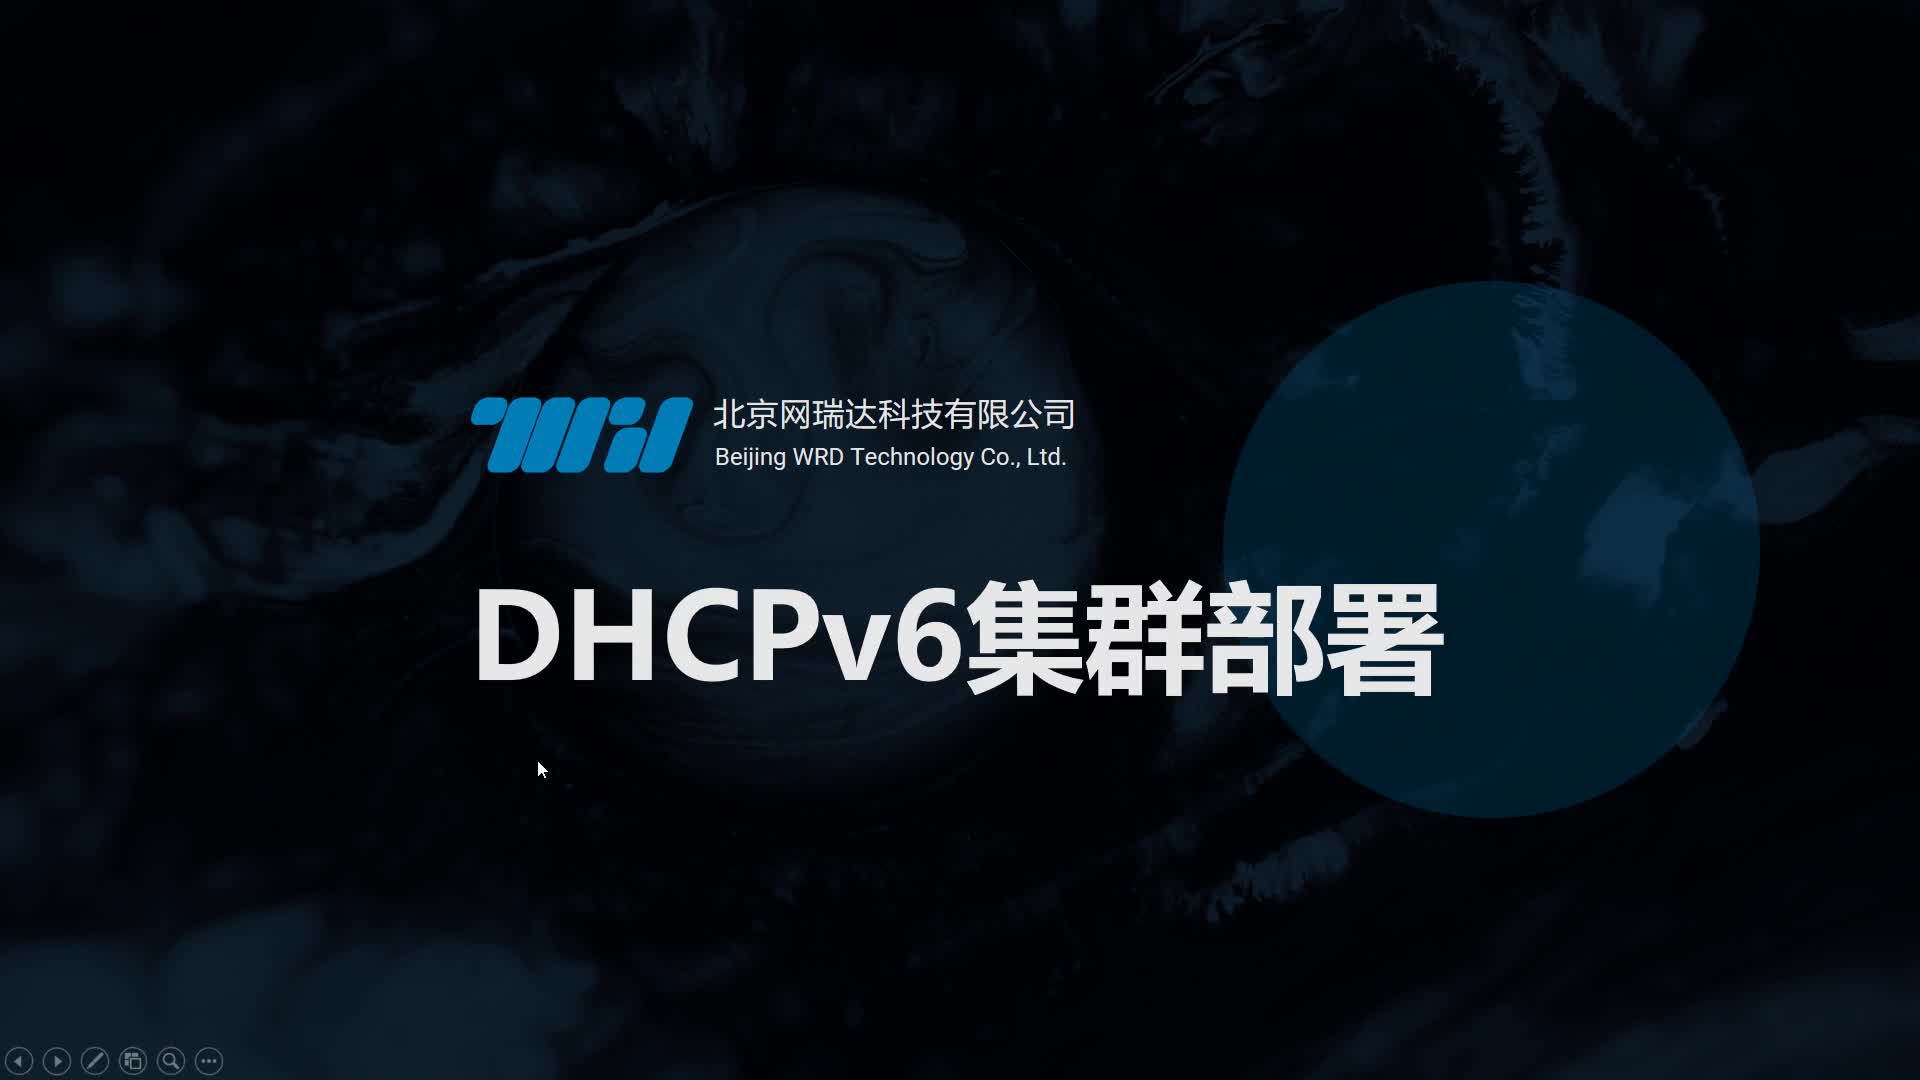 164-DHCP-DHCPv6集群部署